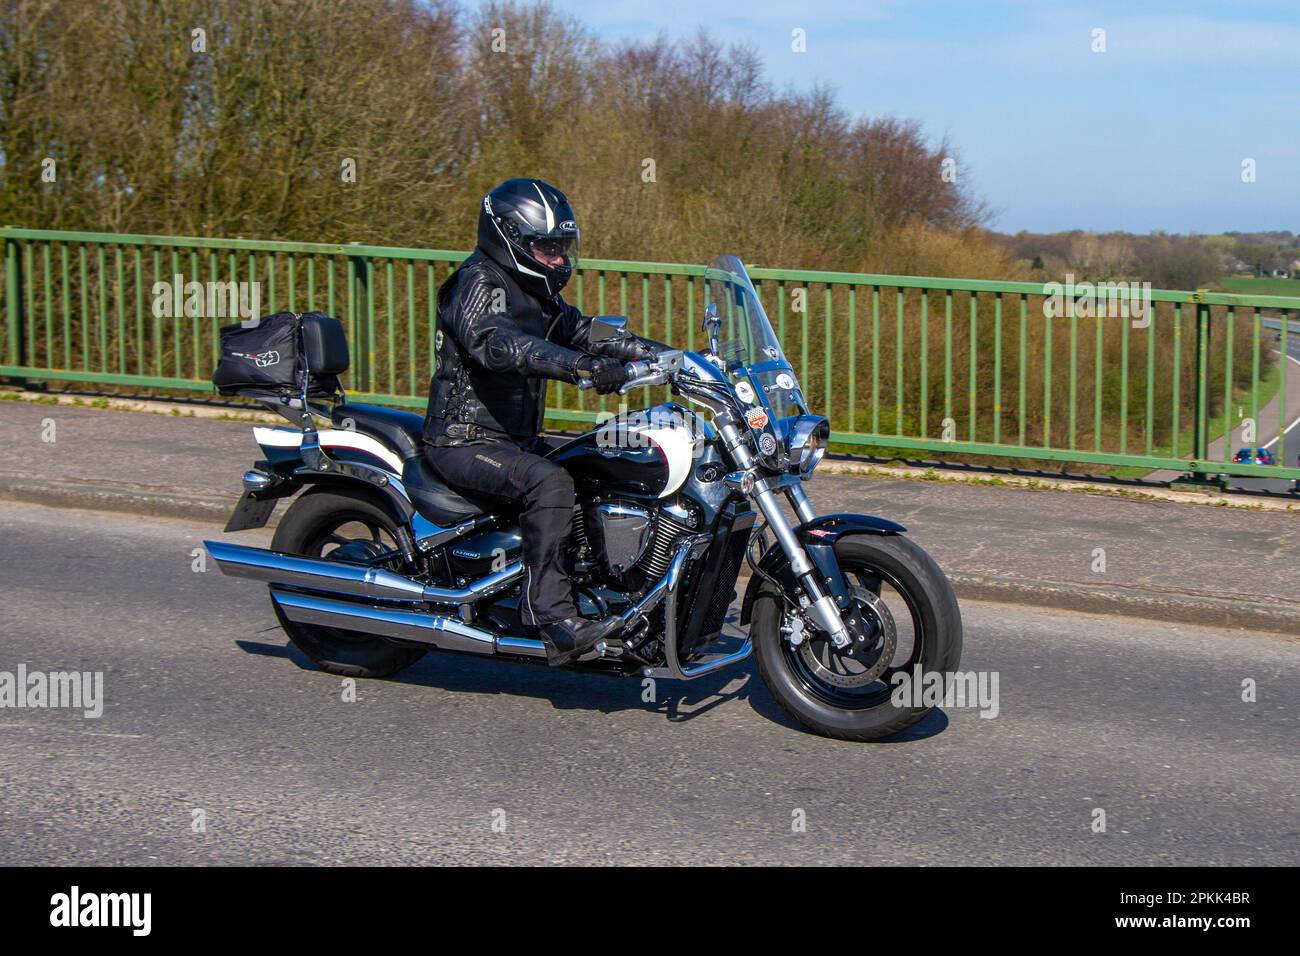 Red Suzuki Intruder 800 Motorcycle on a Sunny Day. Rigt View Editorial  Stock Photo - Image of suzuki, road: 155476893